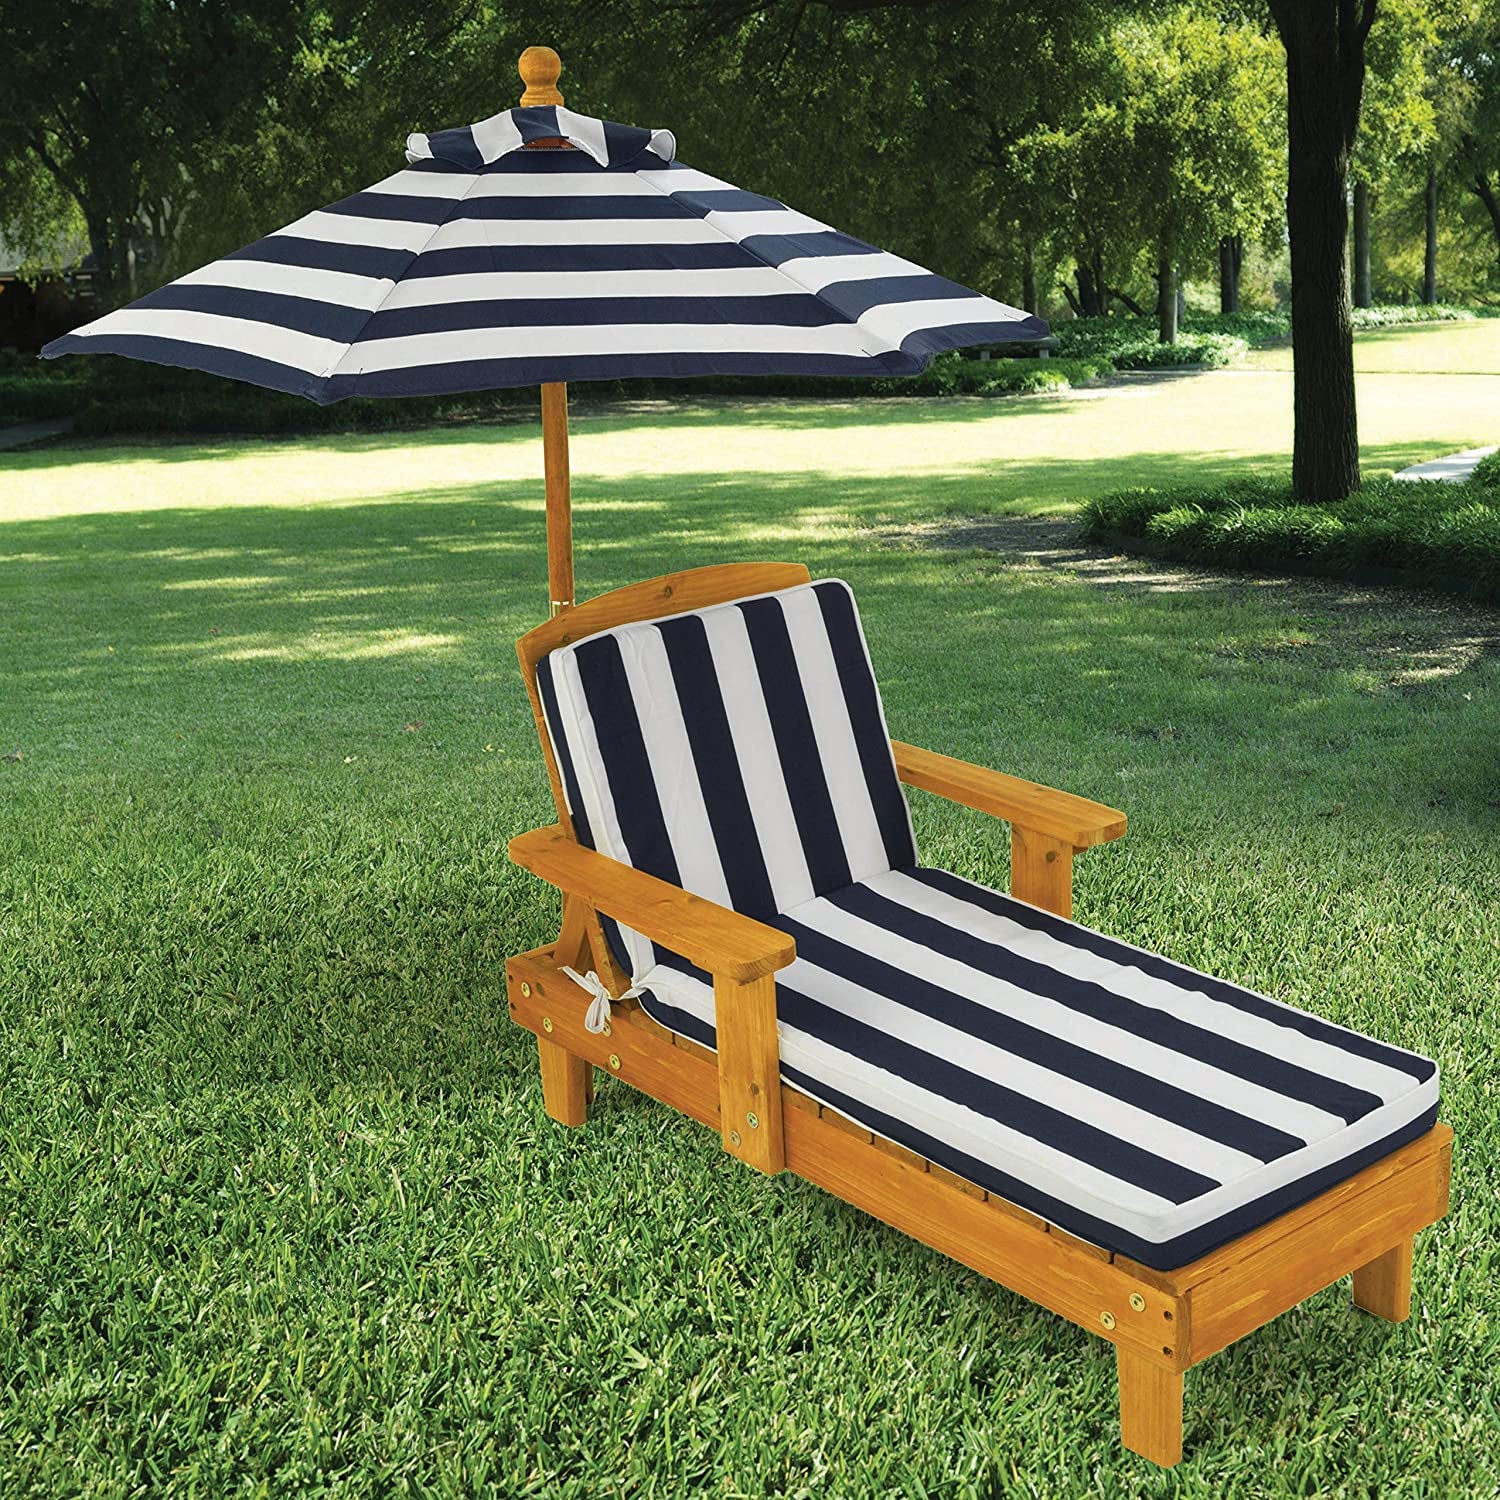 For Kids Only, Inc., Kidkraft Outdoor Chaise with Umbrella and Navy Stripe Cushion